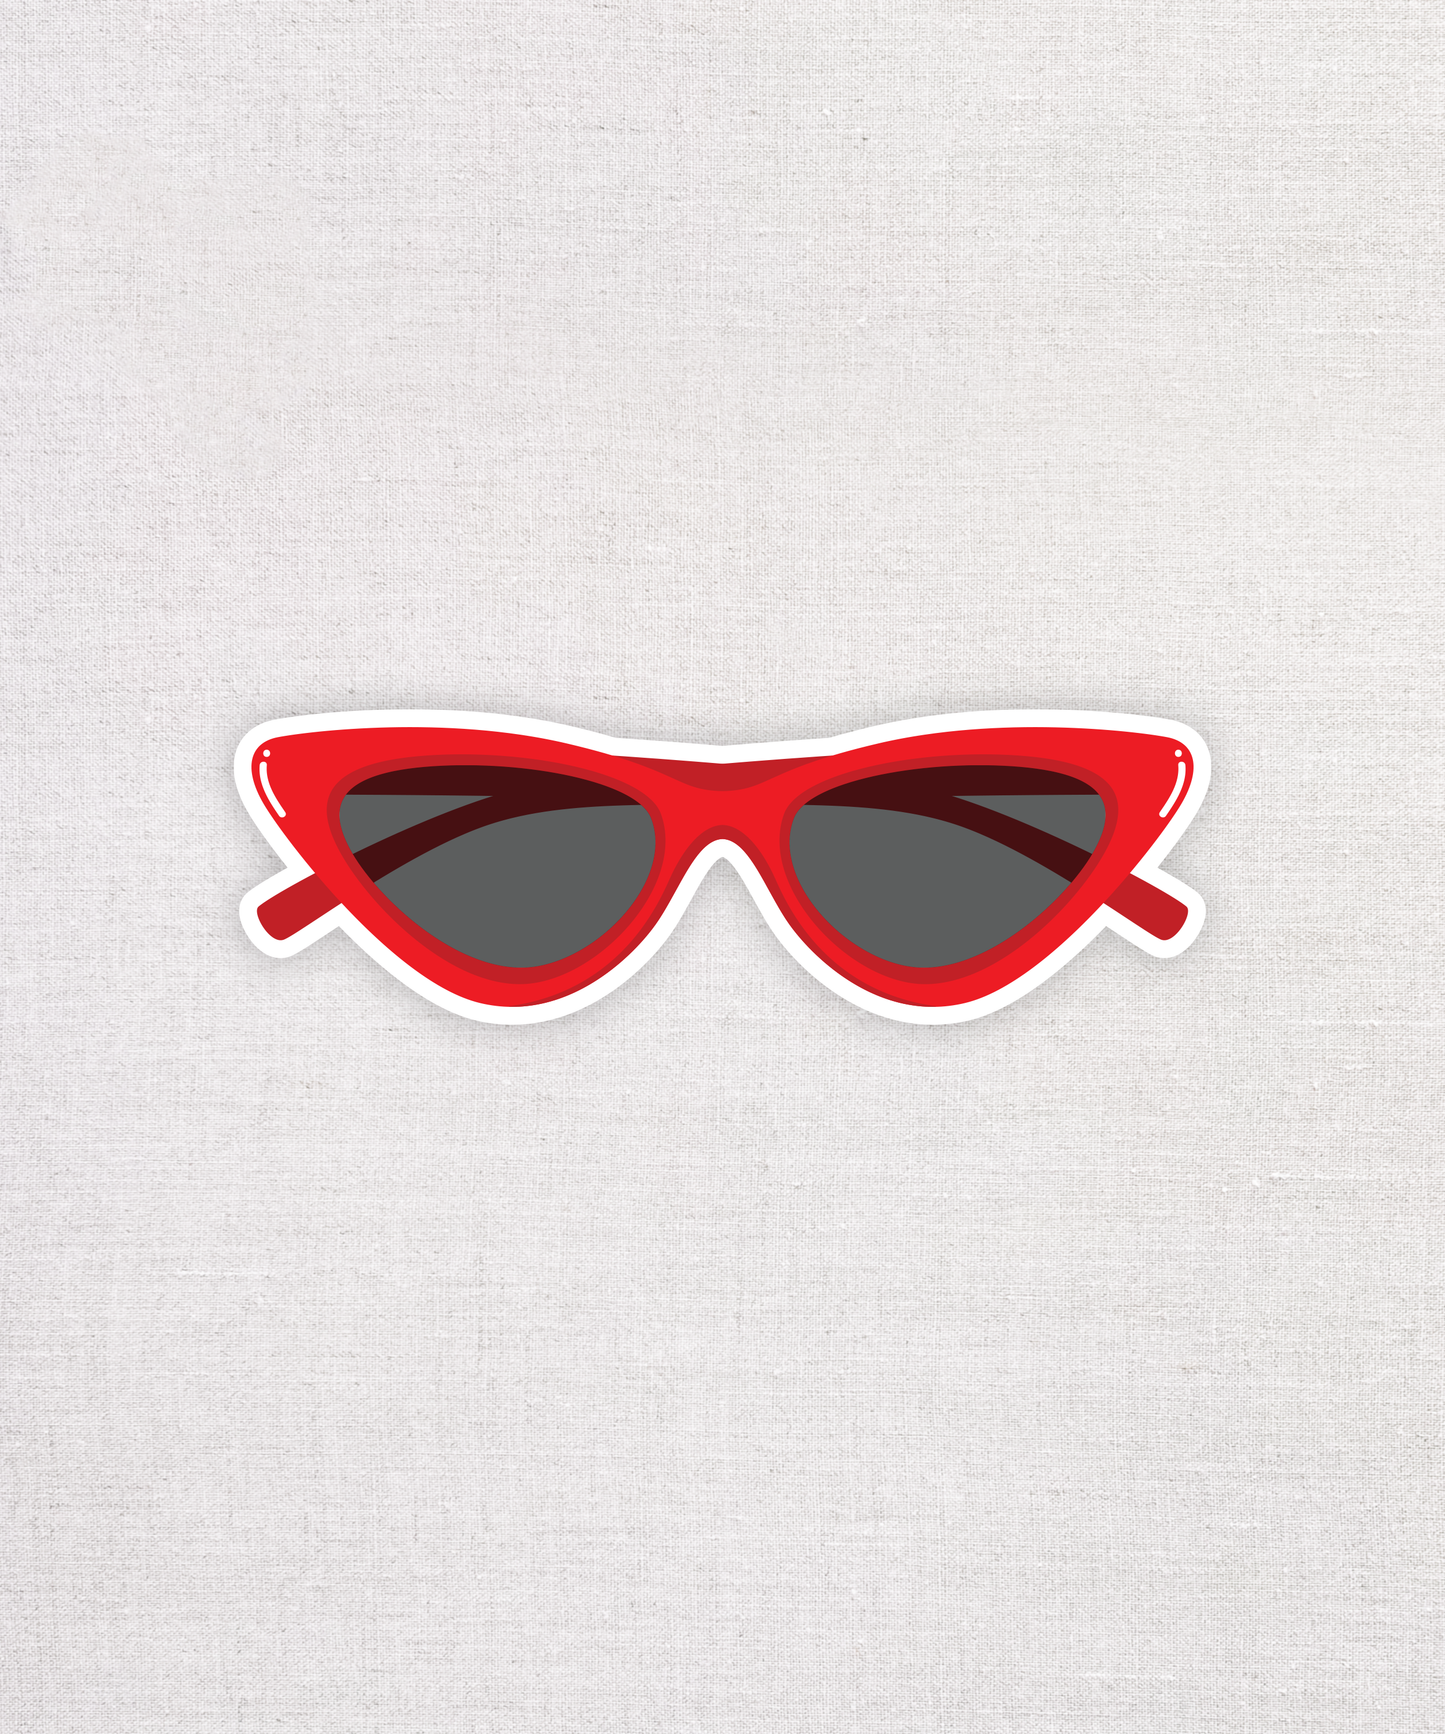 Red Cat Eye Sunglasses Eco-Friendly Sticker. Sustainable Water Bottle and Laptop Sticker.